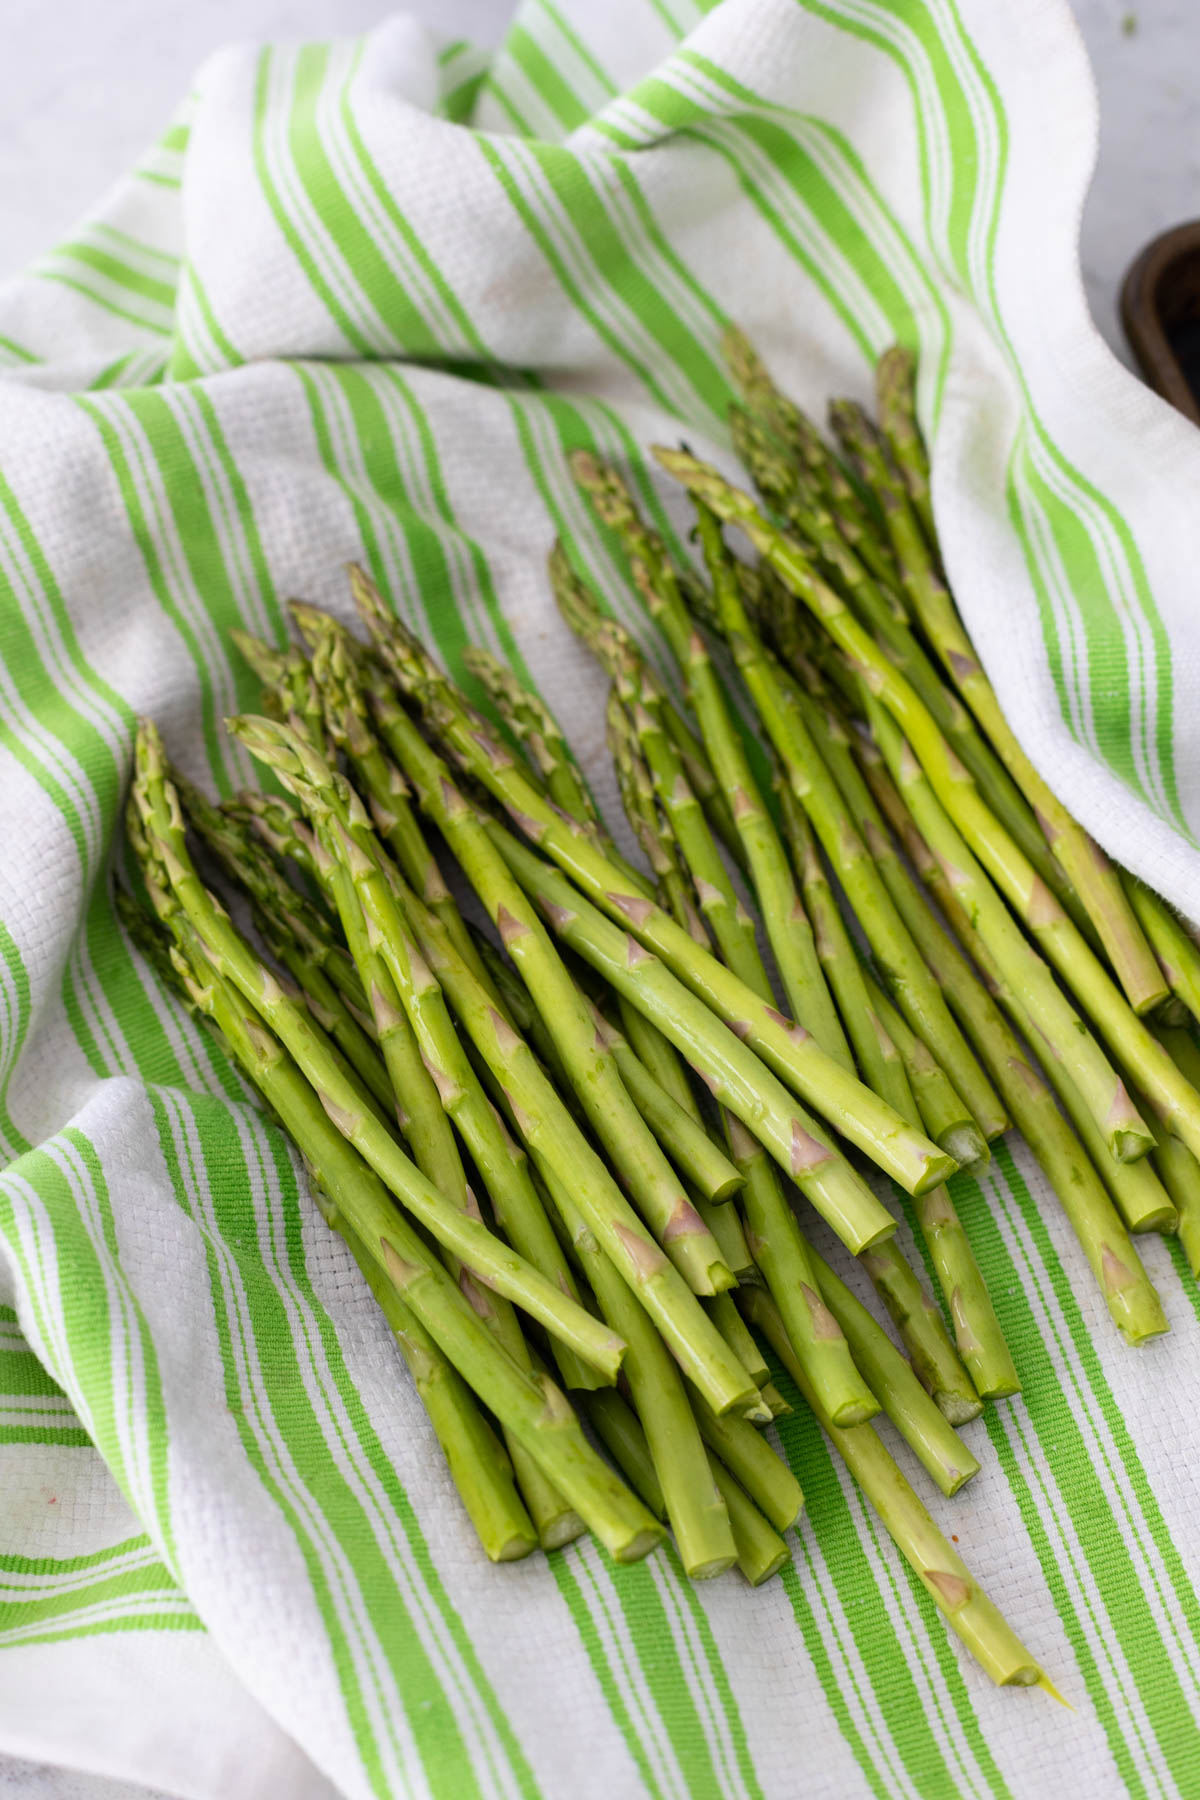 The washed asparagus is drying on a kitchen towel.